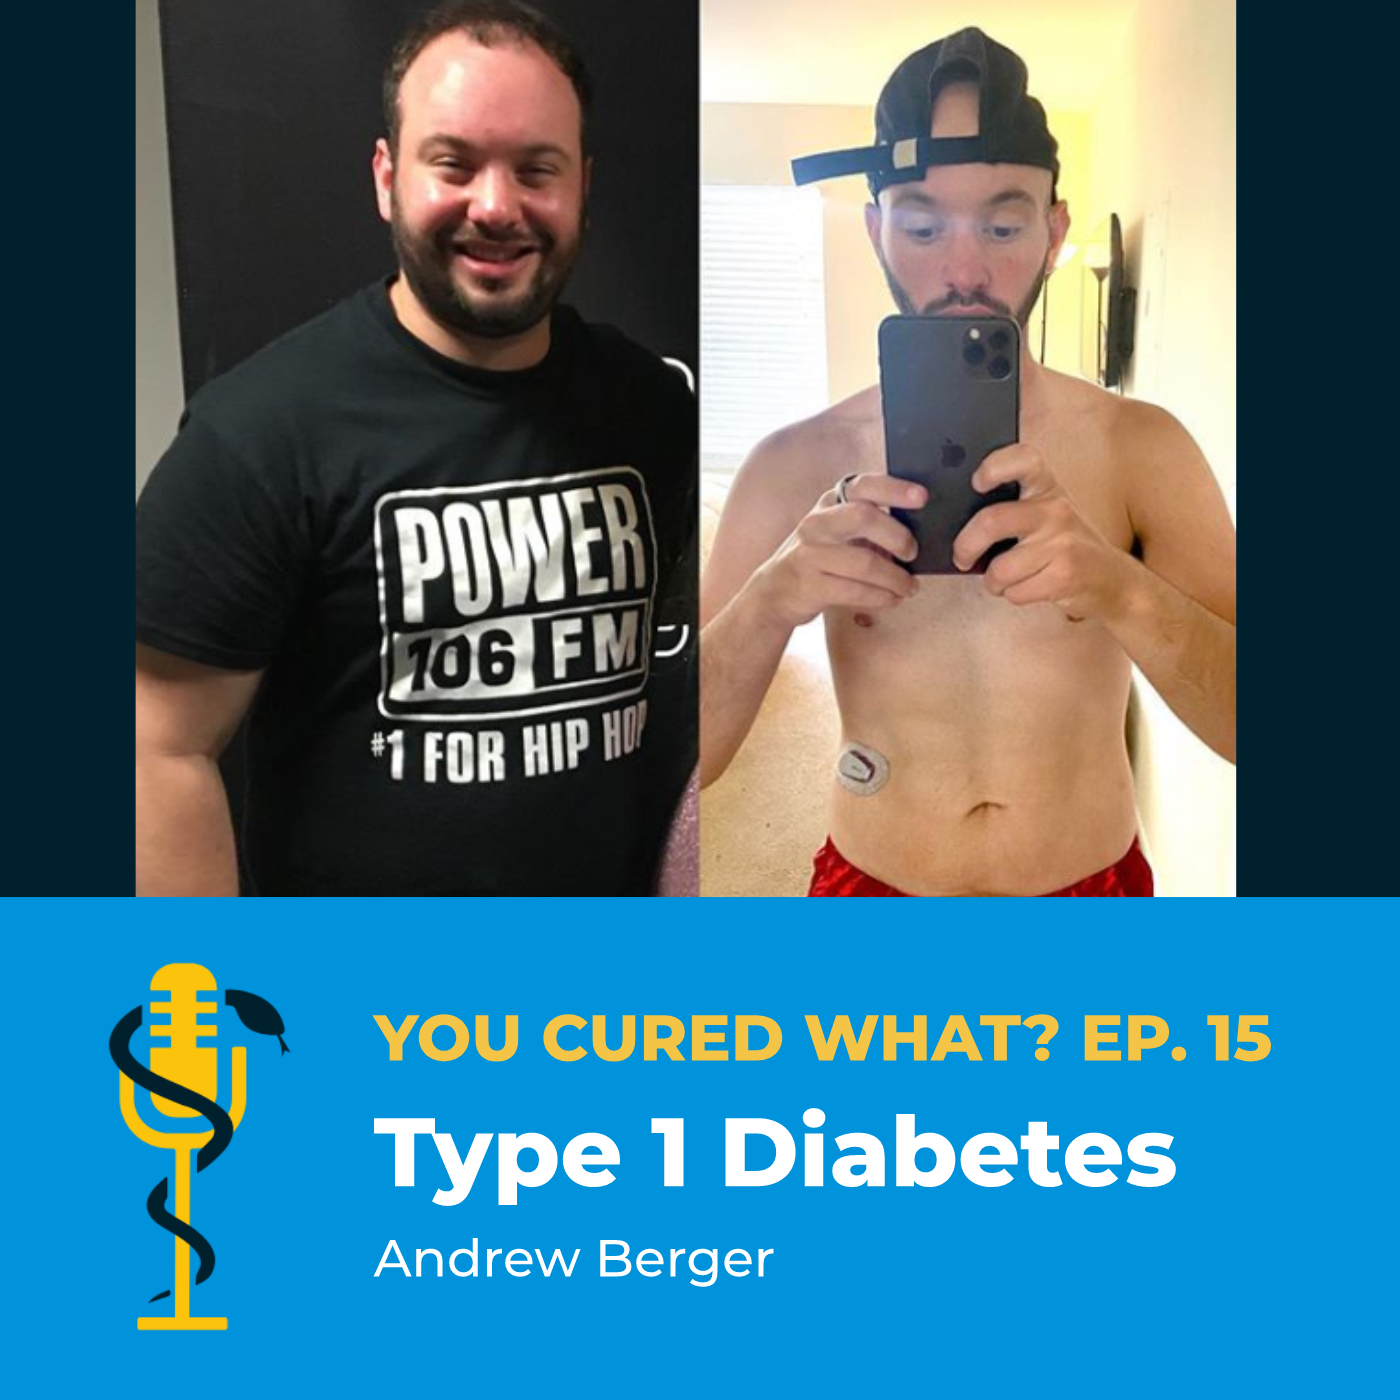 Ep.15: Type 1 Diabetes with Andrew Berger